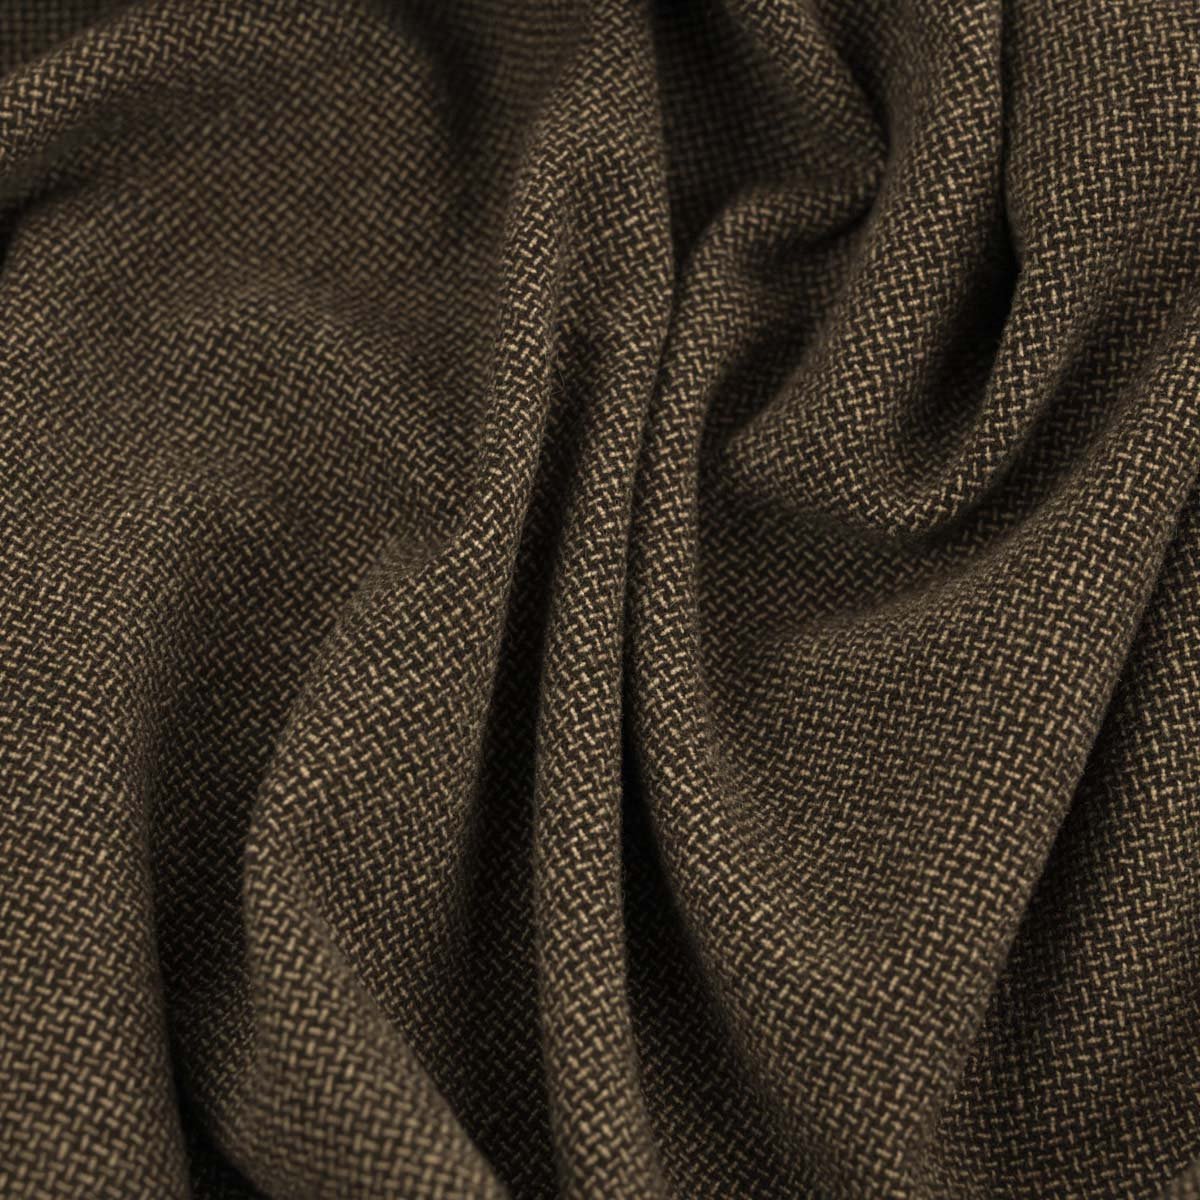 Brown & Oatmeal Suiting Wool 97384